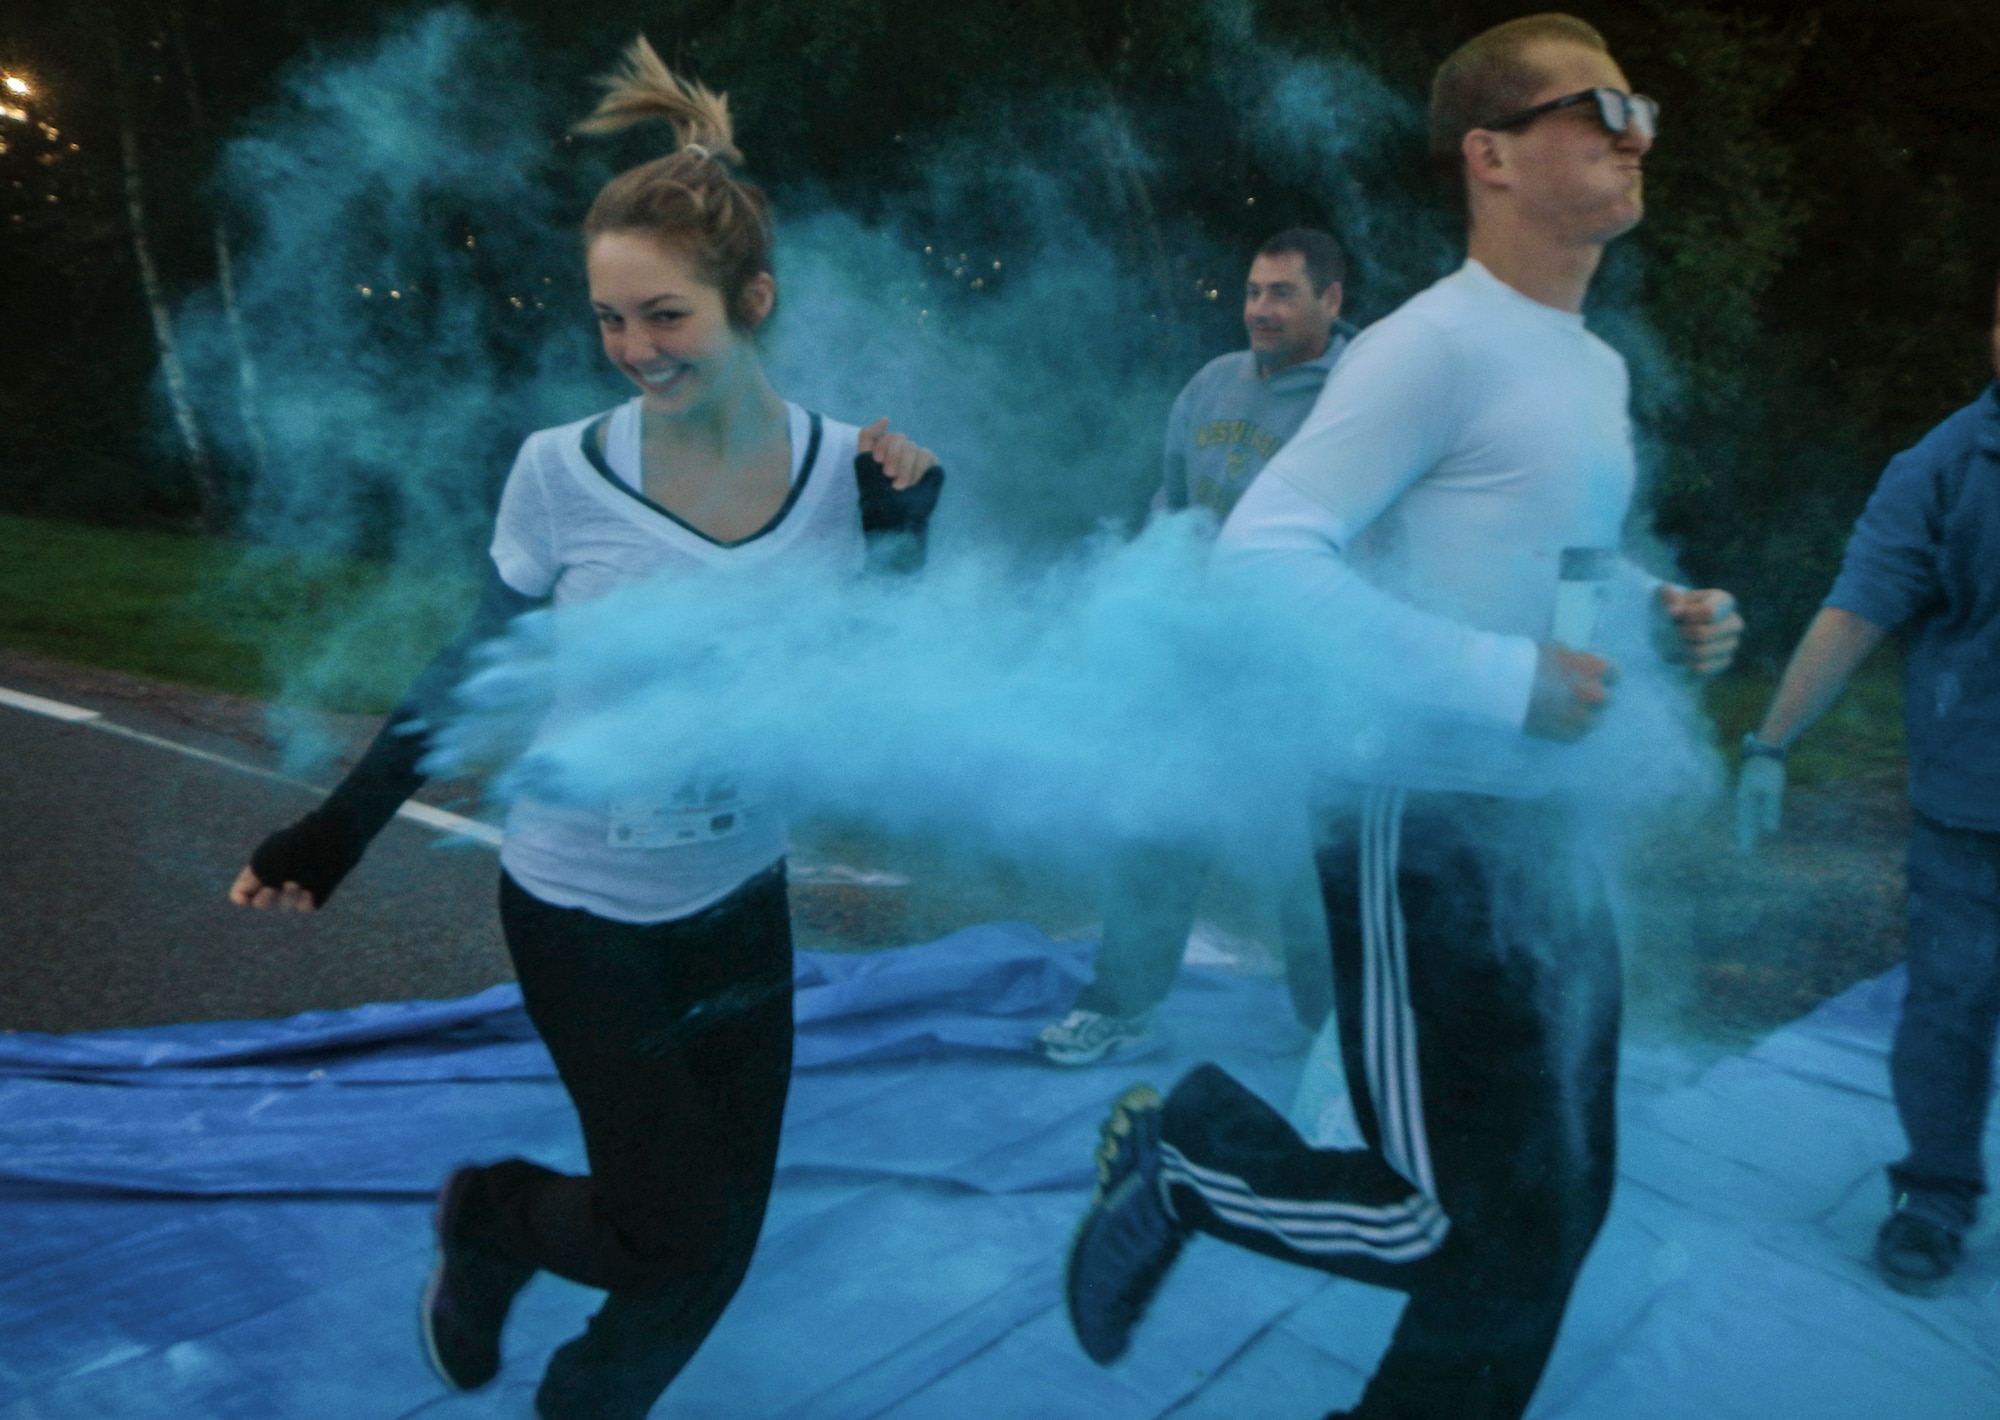 Participants are showered in color Aug. 21, 2014, during the Diversity Day 5K Color Run at Spangdahlem Air Base, Germany. Volunteers threw colored powder at participants at designated points on the route. (U.S. Air Force photo by Staff Sgt. Christopher Ruano/Released)